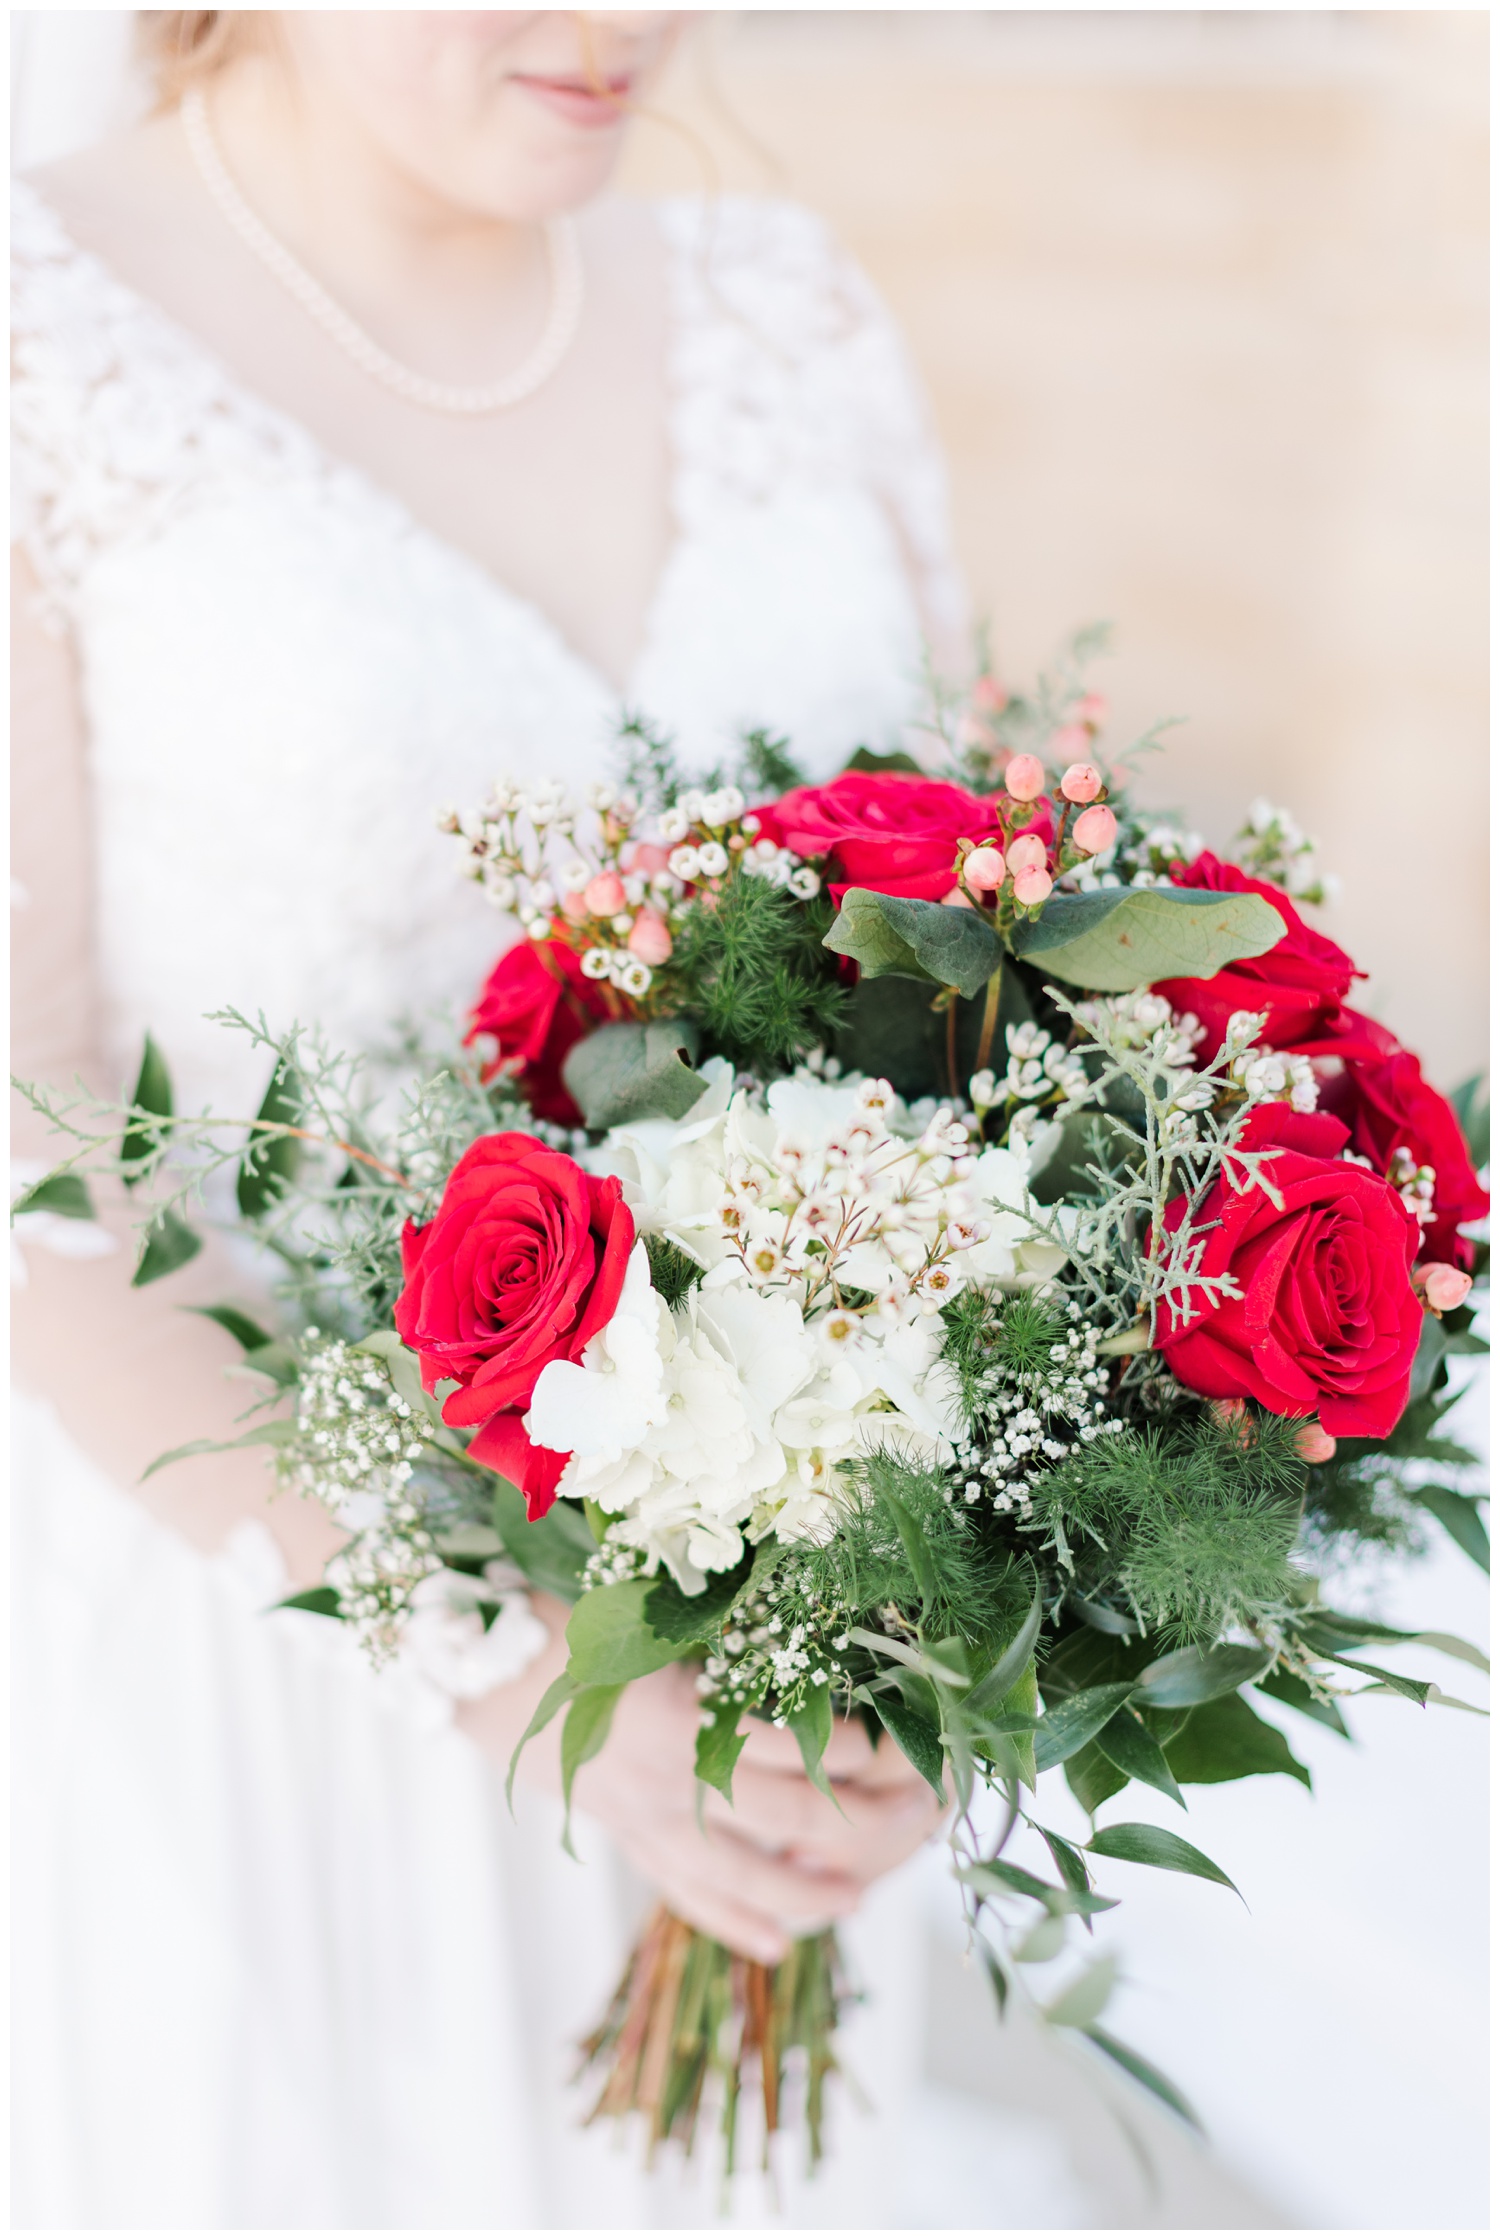 Winter wedding bridal bouquet featuring red roses, white hydrangeas, holly berries, evergreen and baby's breath | CB Studio